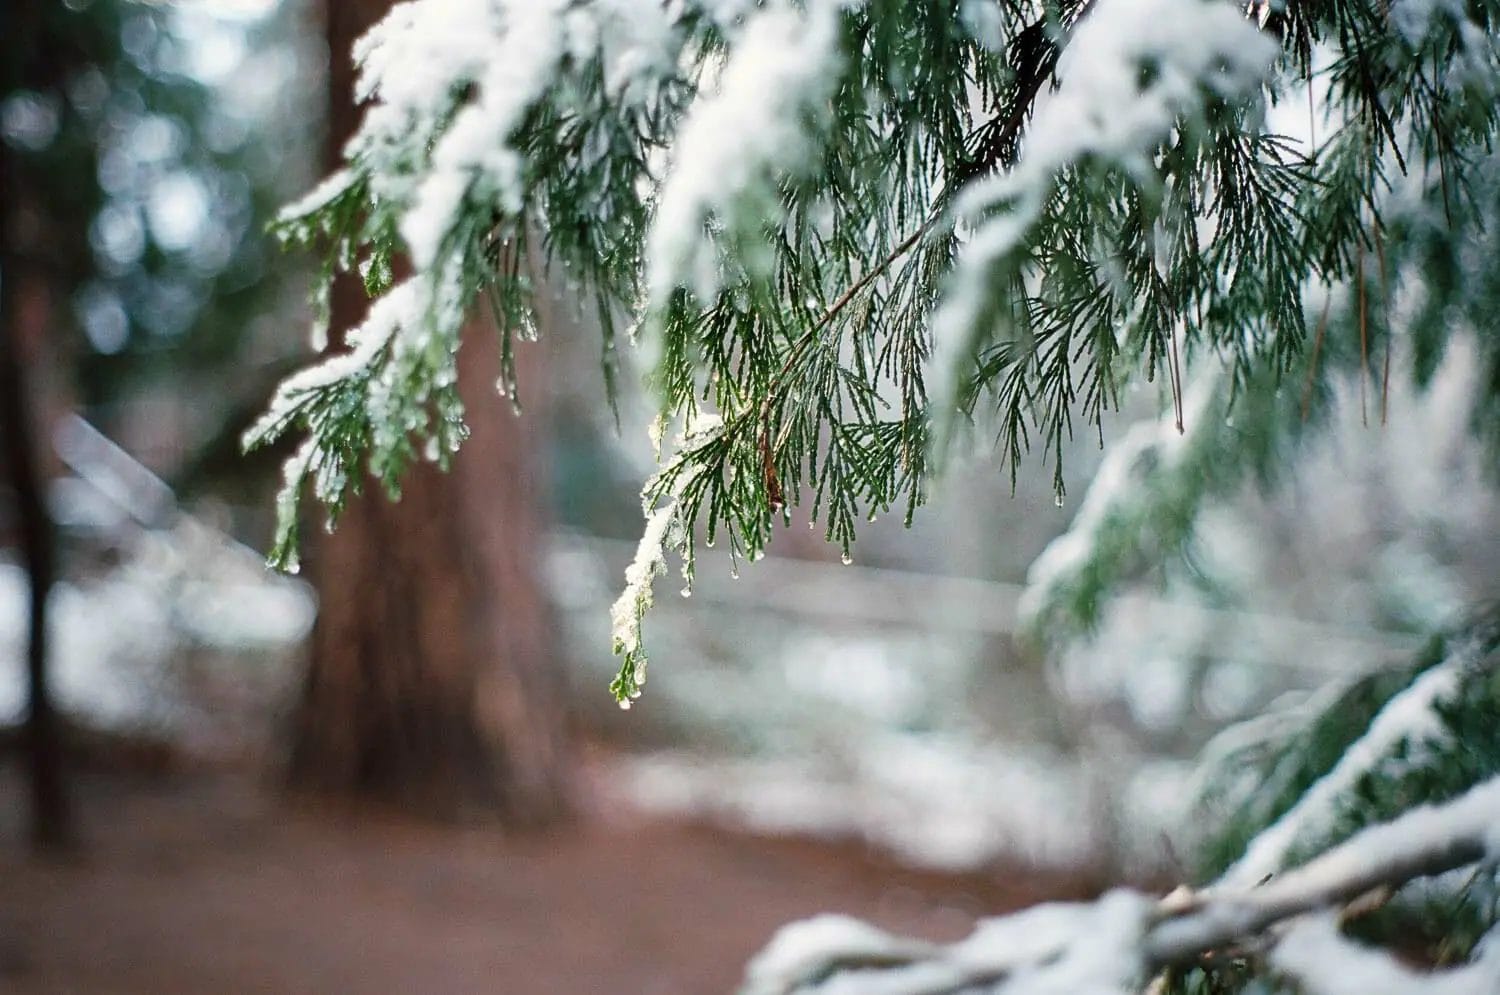 Snow-dusted pine branches with a softly blurred forest background.